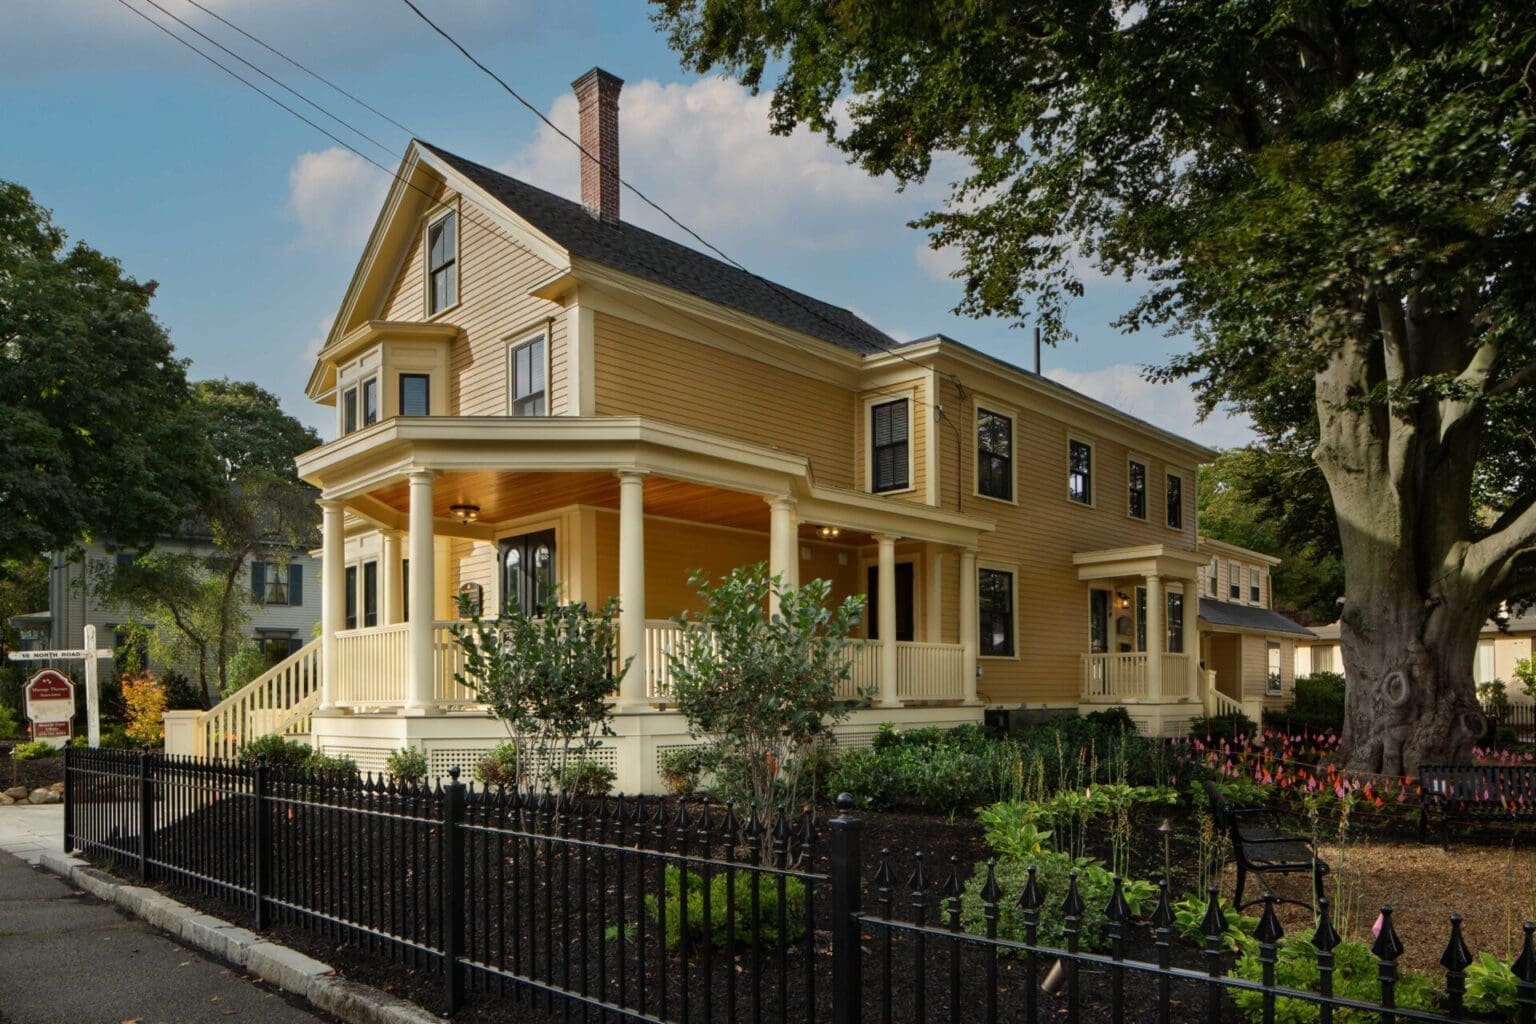 A photo of a yellow building with a front porch with yellow columns and railings.